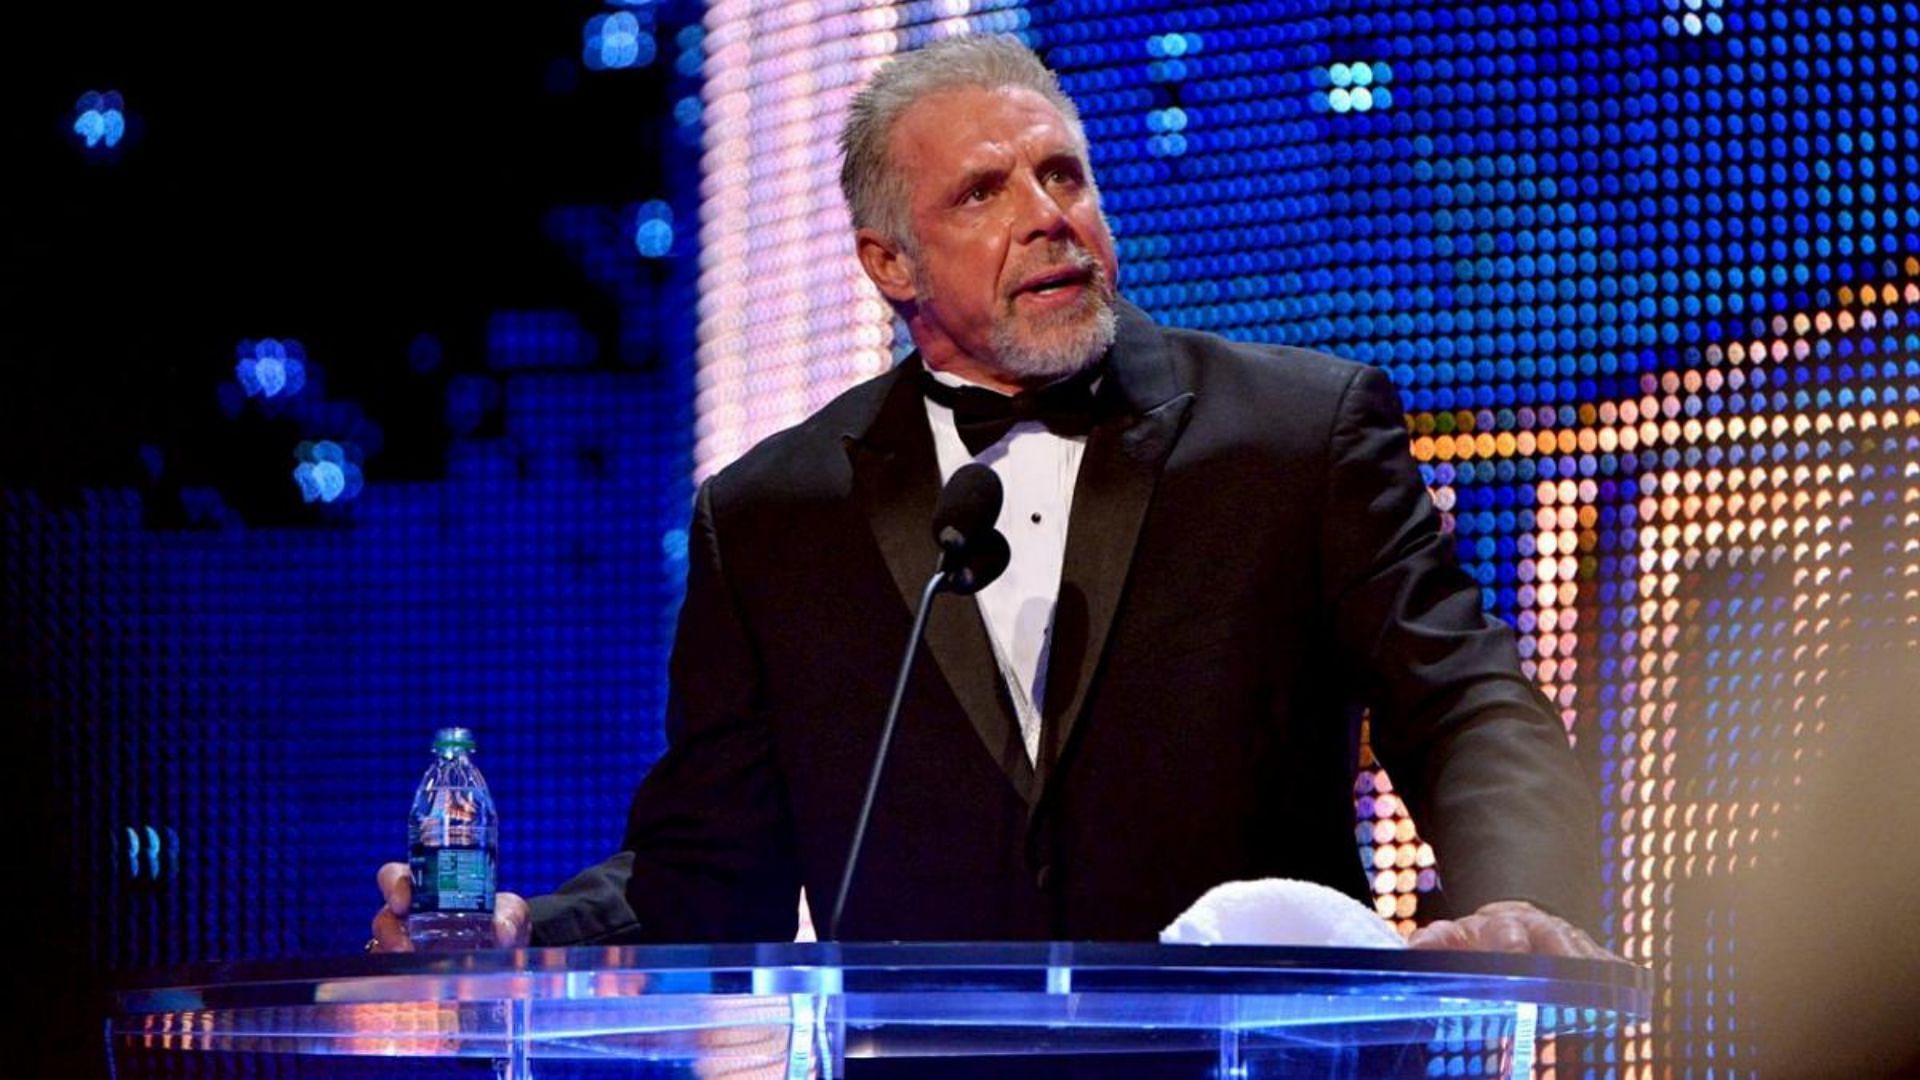 The Ultimate Warrior joined the WWE Hall of Fame in 2014, three days before he passed away.